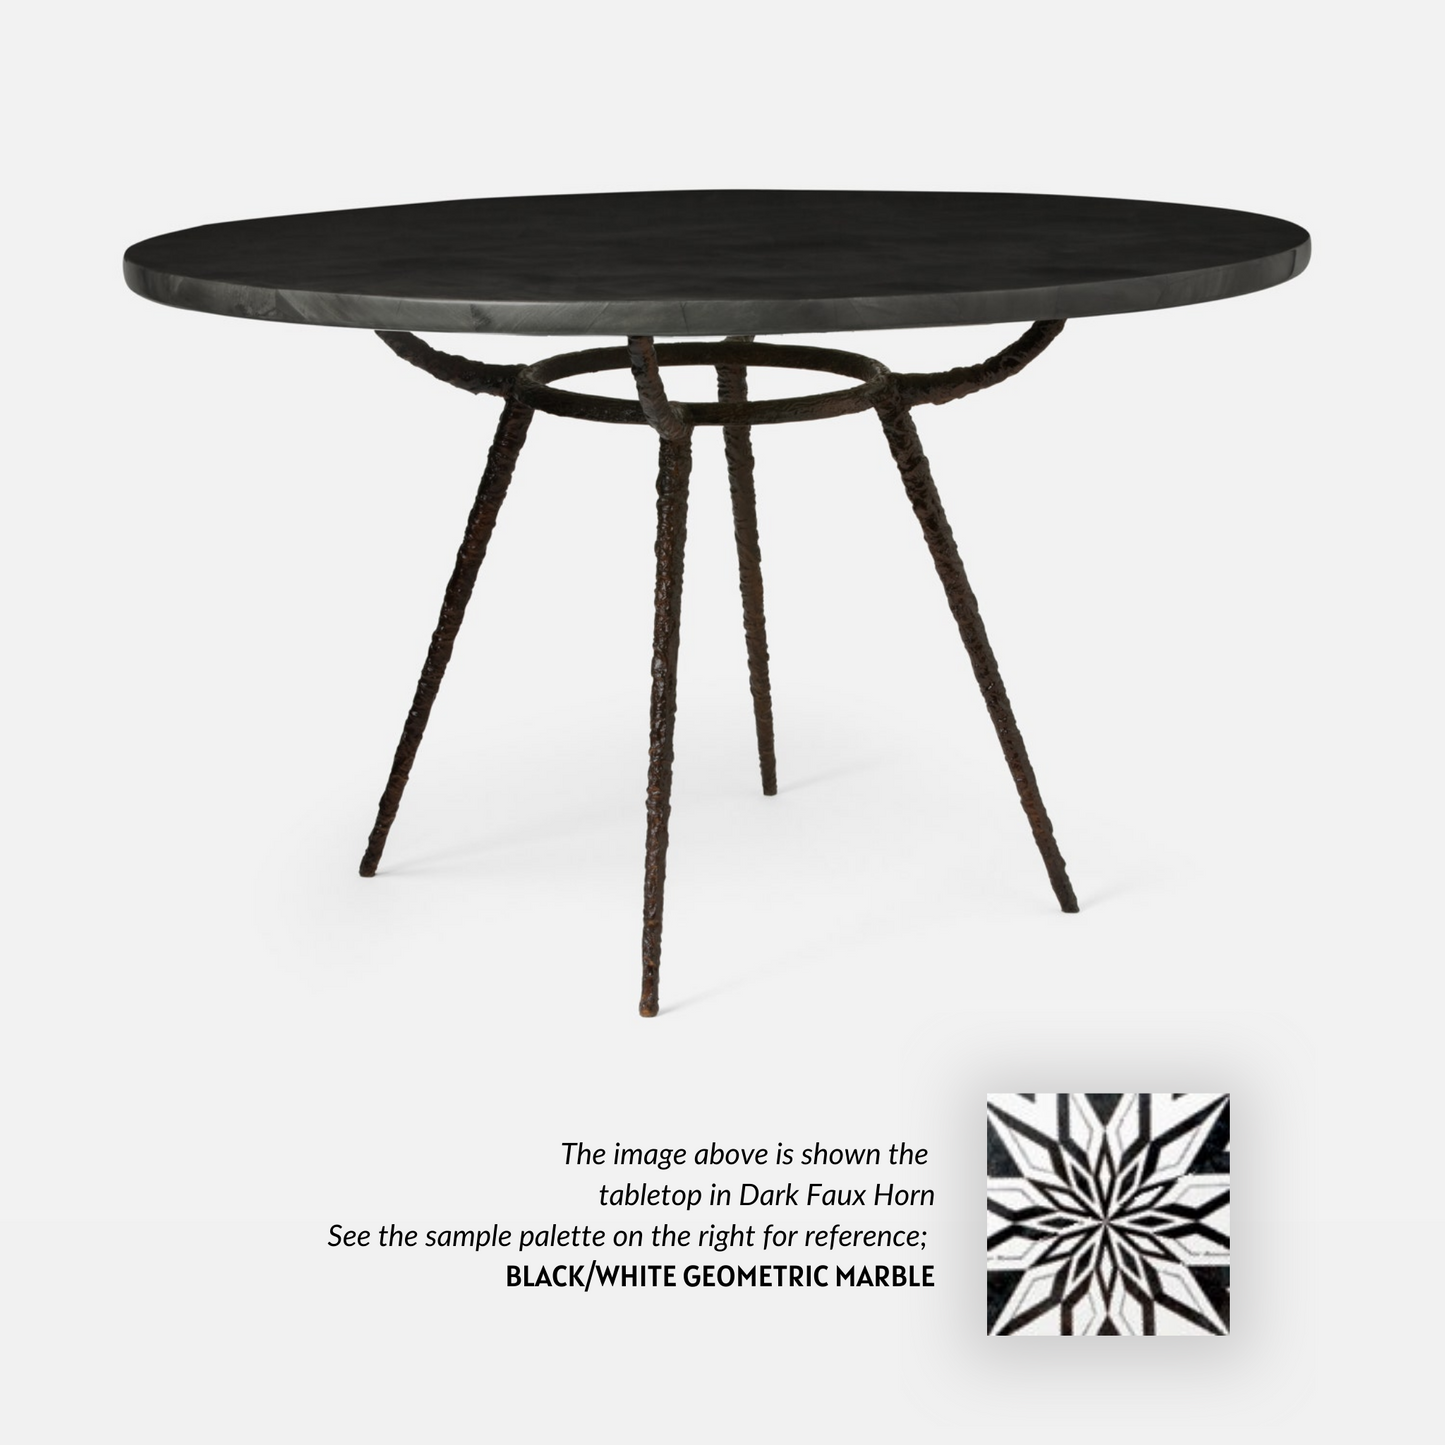 Made Goods Grace 54" x 30" Bronze Pitted Iron Dinning Table With Round Black/White Geometric Marble Table Top